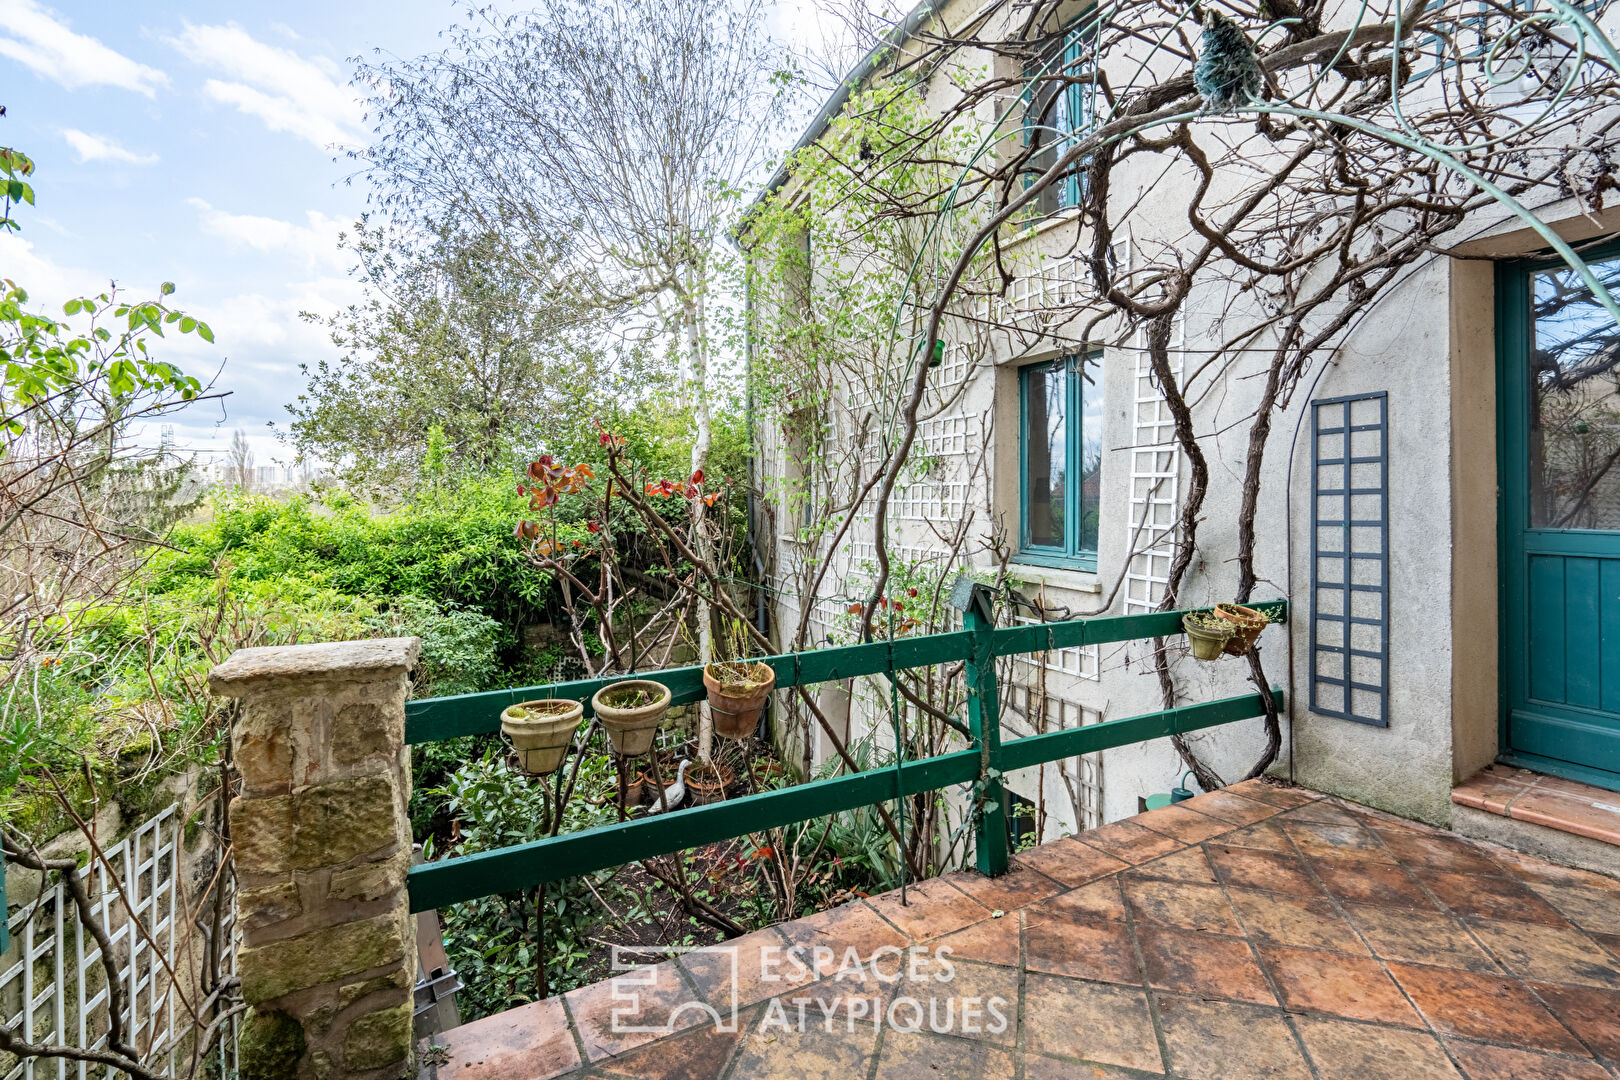 Old house and garden with exceptional views of the banks of the Seine and Paris.